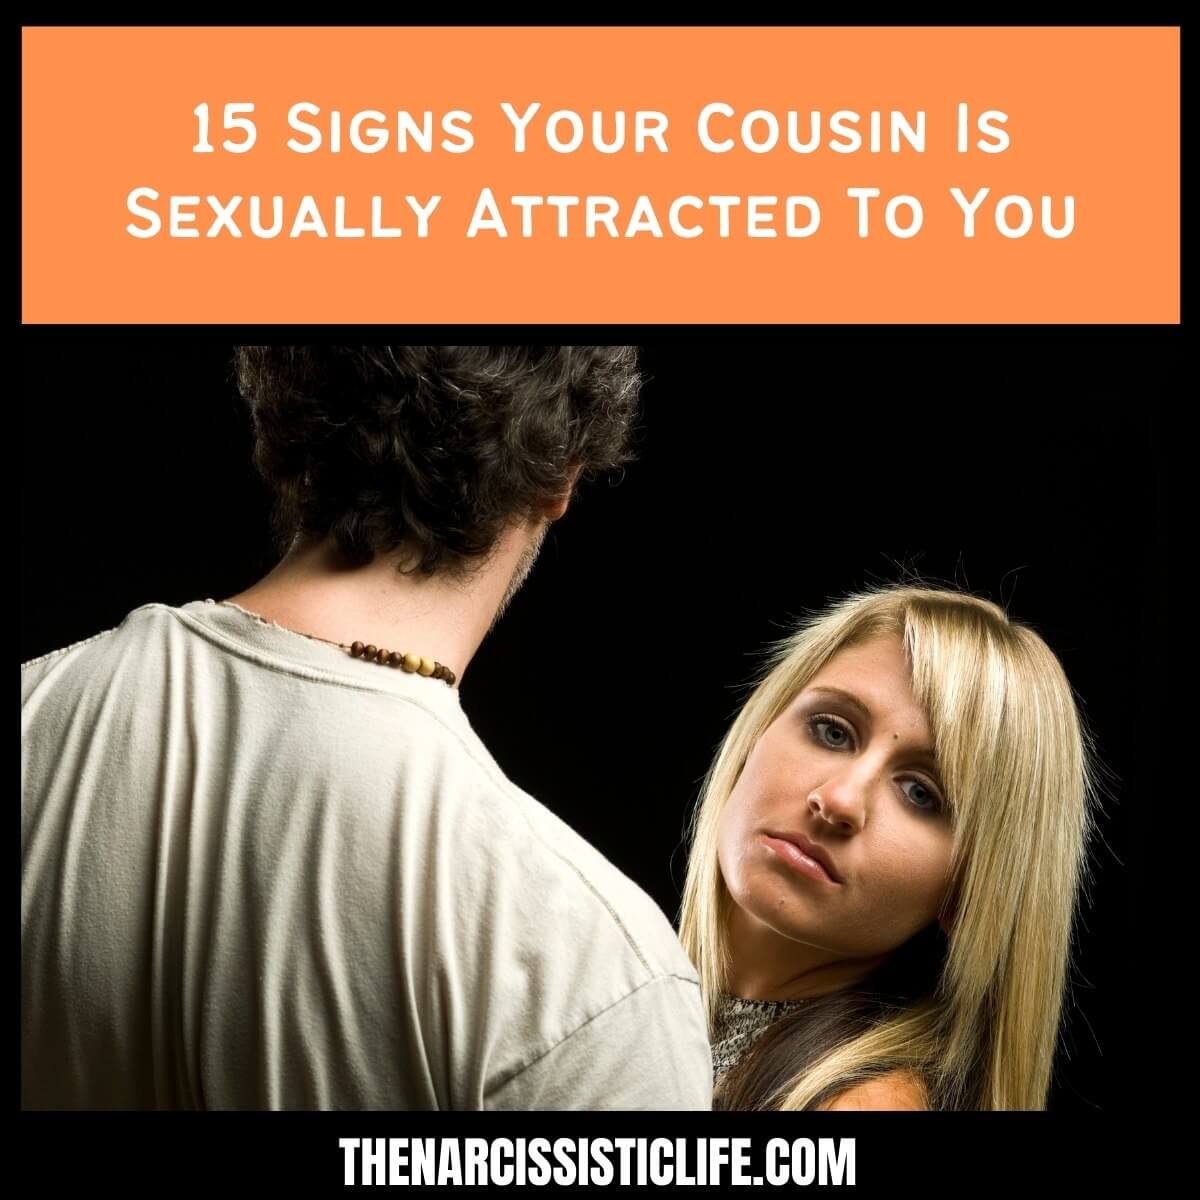 15 Signs Your Cousin Is Sexually Attracted To You